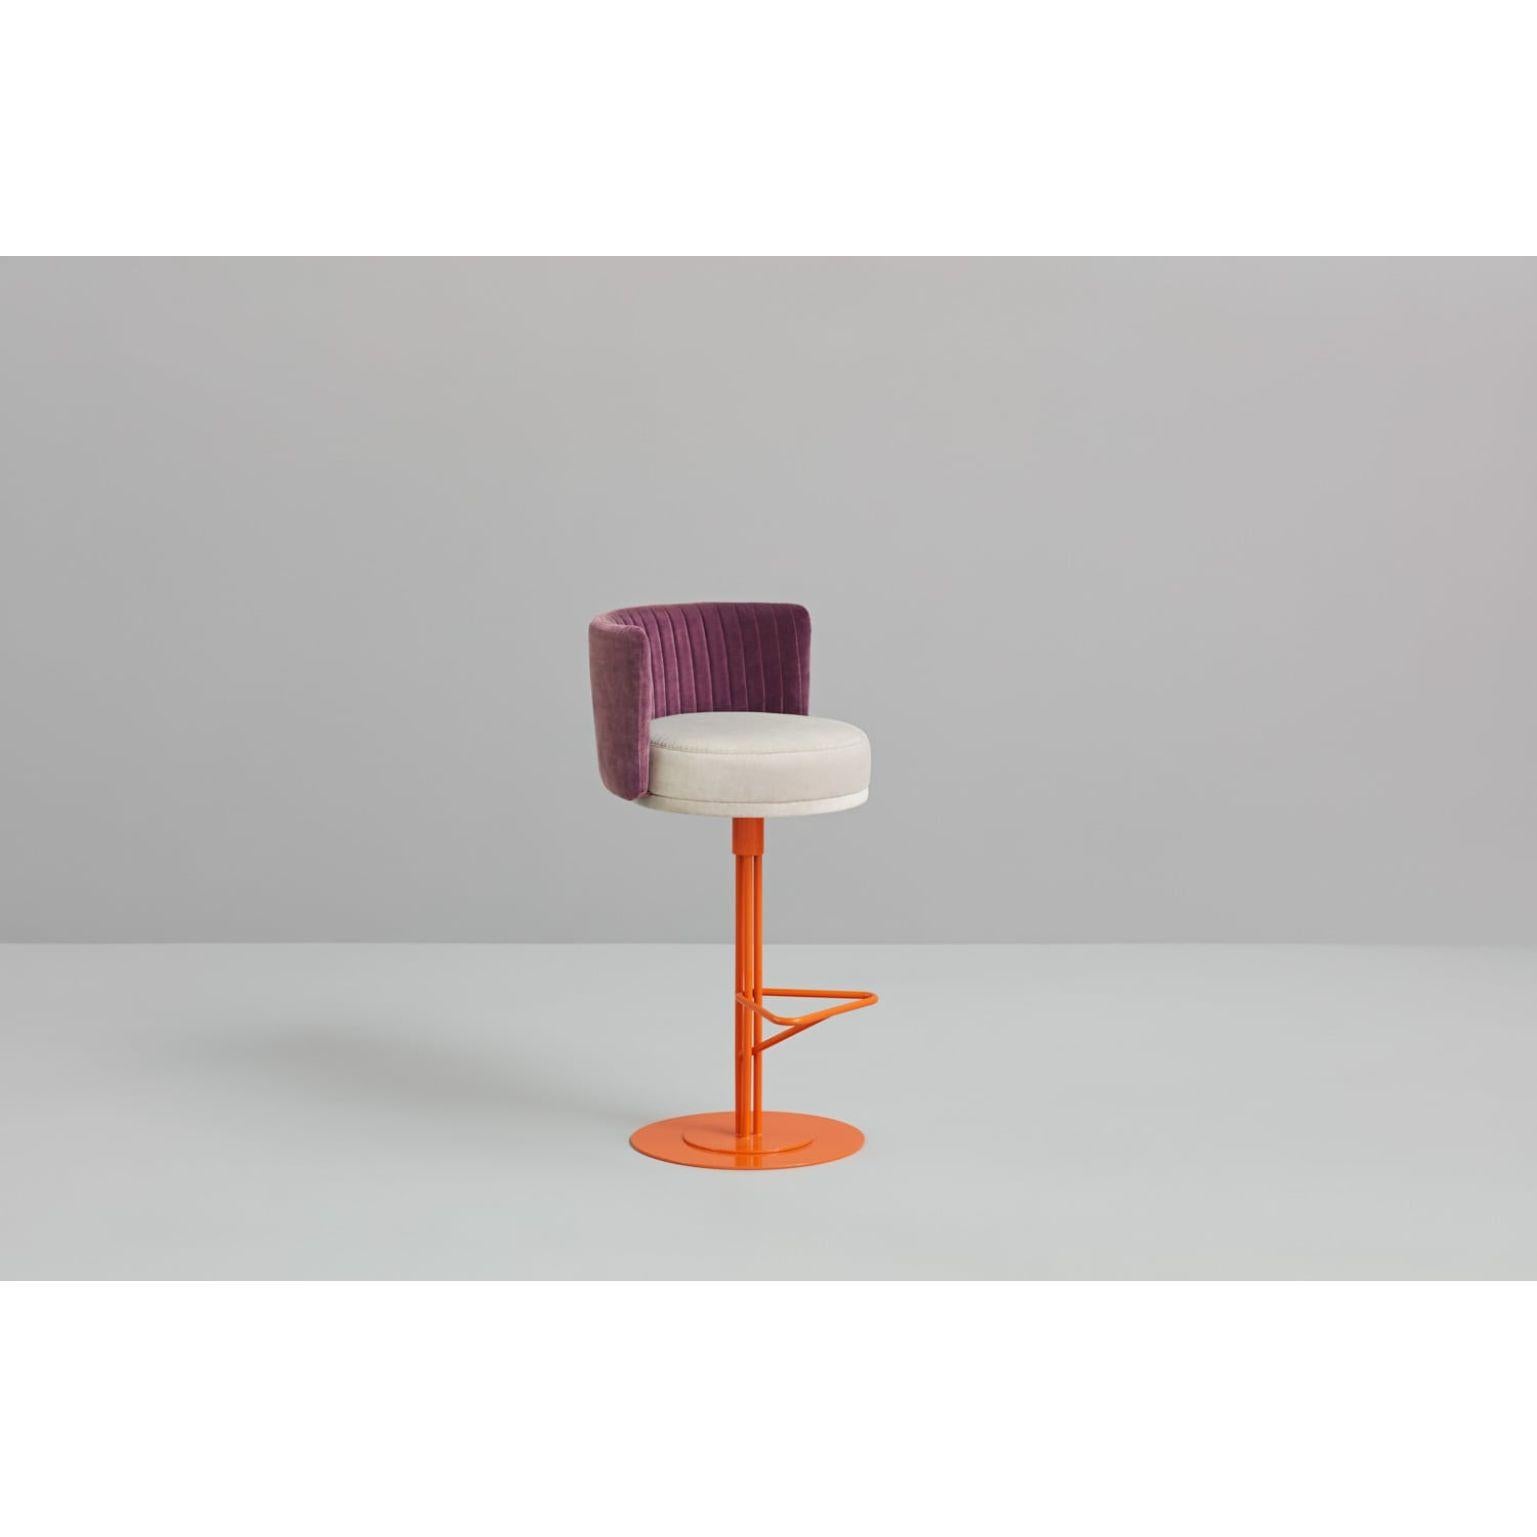 3 colored athens stool by Afroditi Krassa
Dimensions: W52, D55, H101, Seat 80
Materials: Iron structure and seat particles board
Foam CMHR (high resilience and flame retardant) for all our cushion filling systems
Painted iron structure

Also